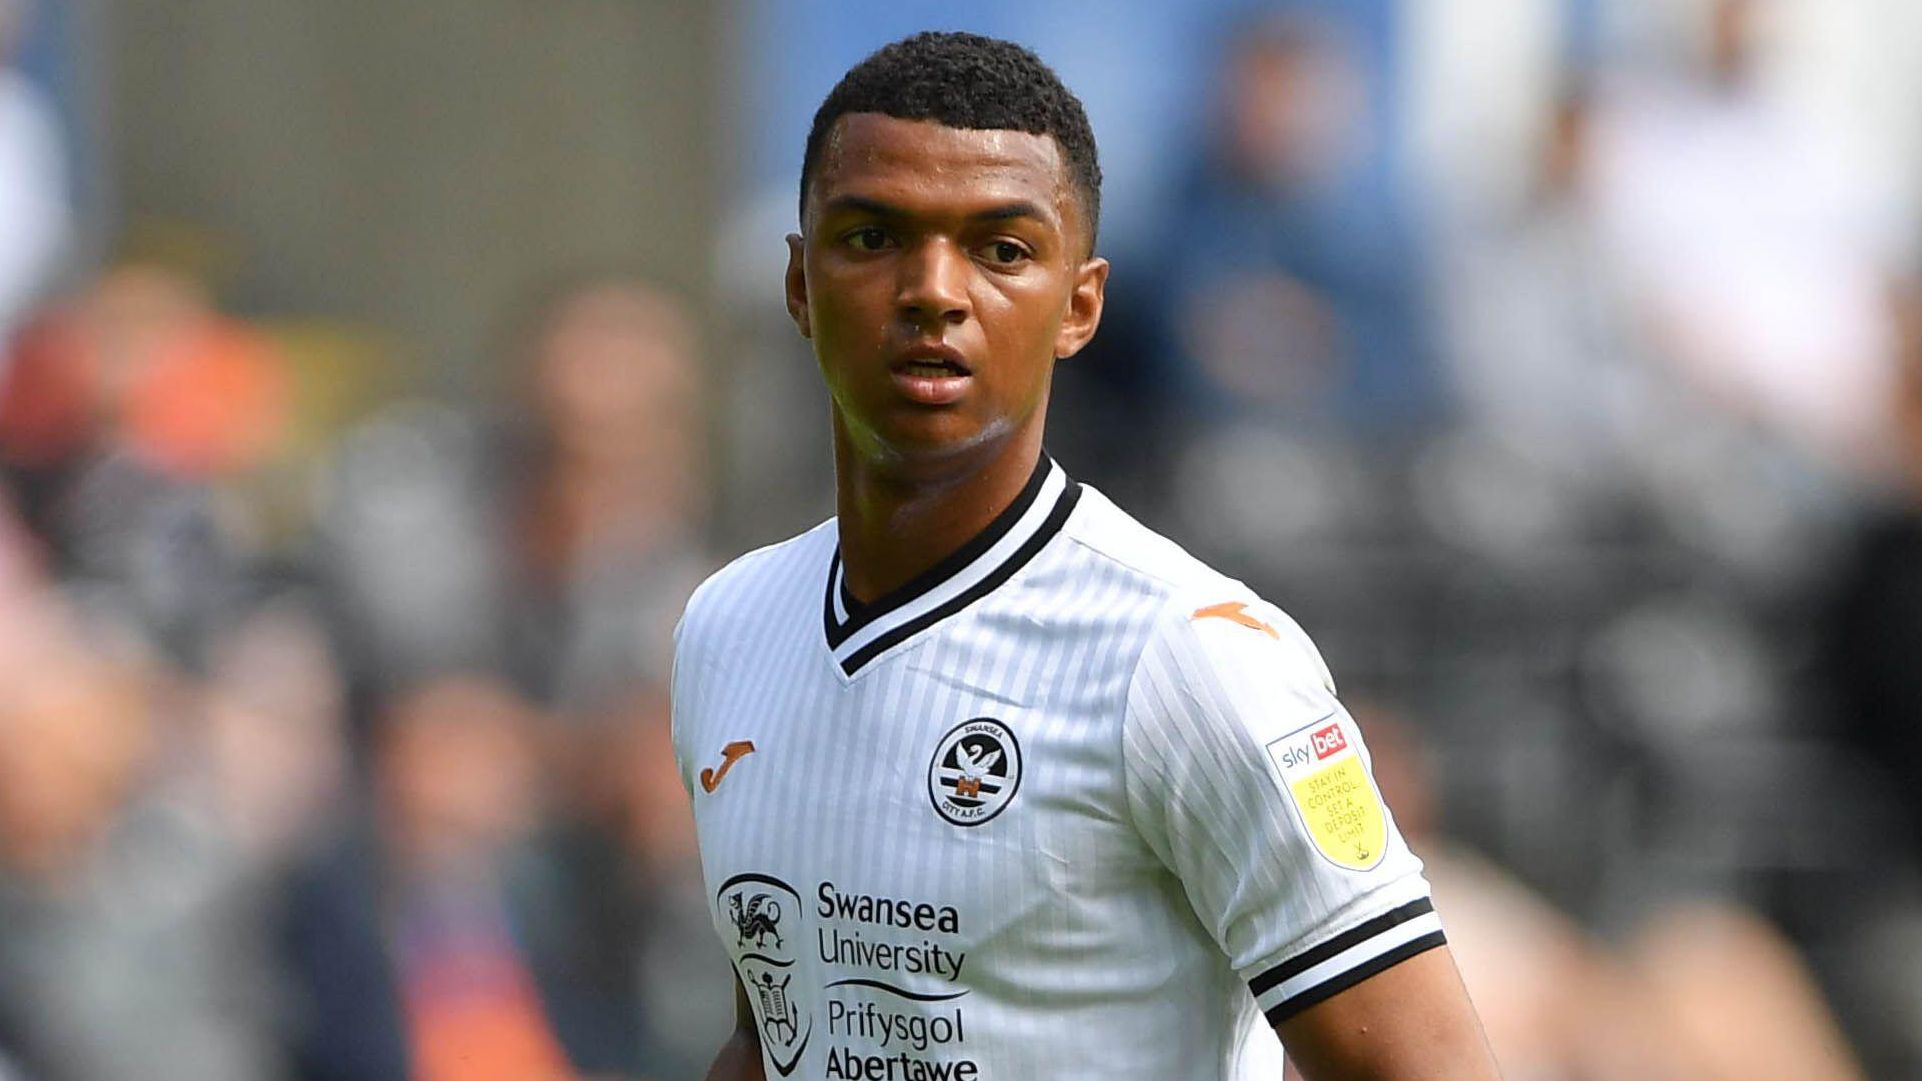  Coventry City in serious negotiation to sign Swansea City's 22-year-old electrifying striker